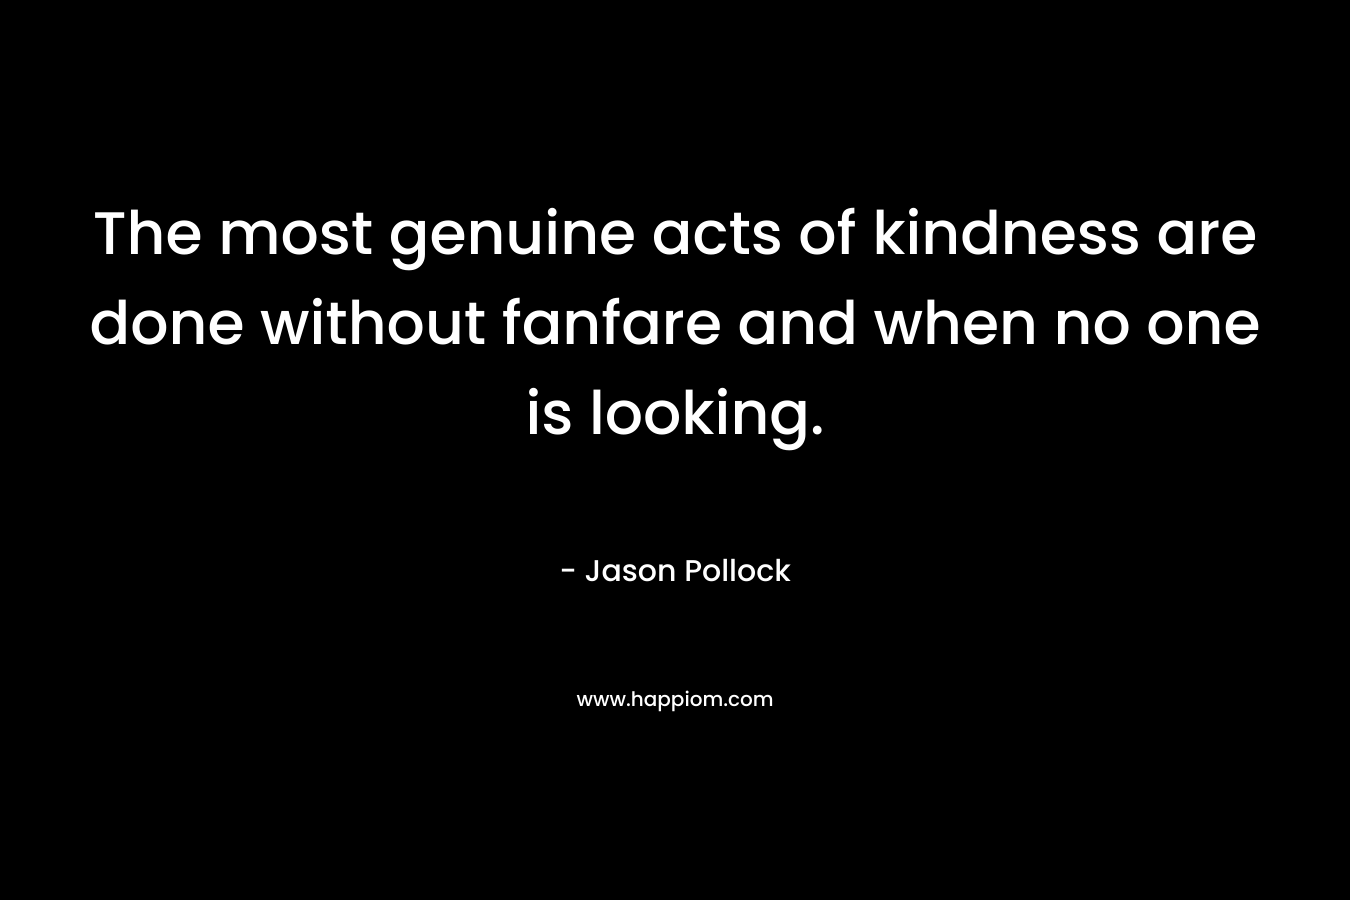 The most genuine acts of kindness are done without fanfare and when no one is looking.